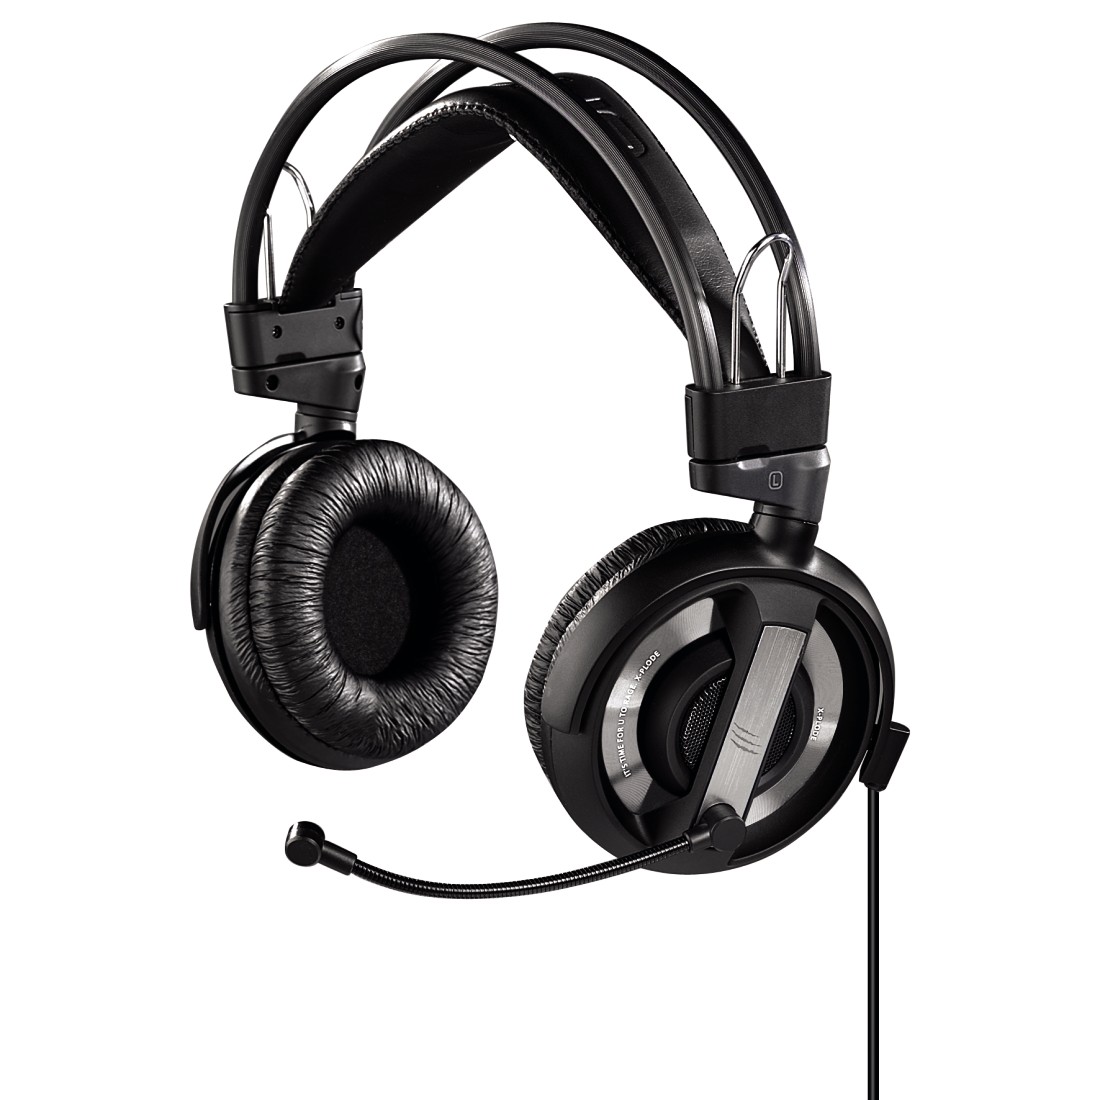 Hama Urage Headset Outlet Store, UP TO 64% OFF | www.mcep.es